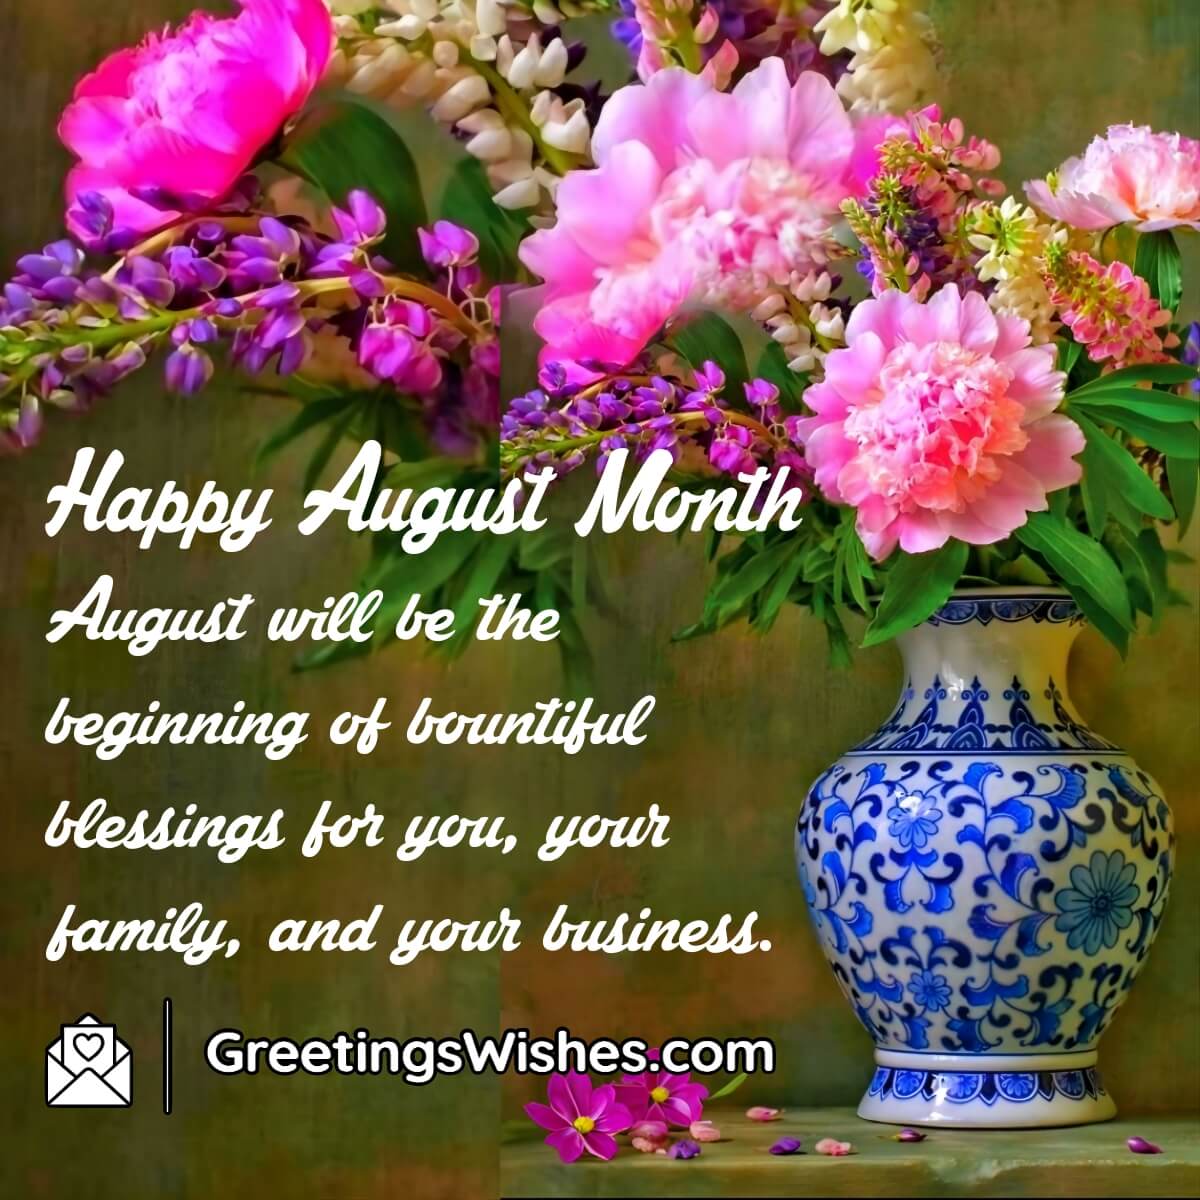 Happy August Month Wishes ( 01 Aug )